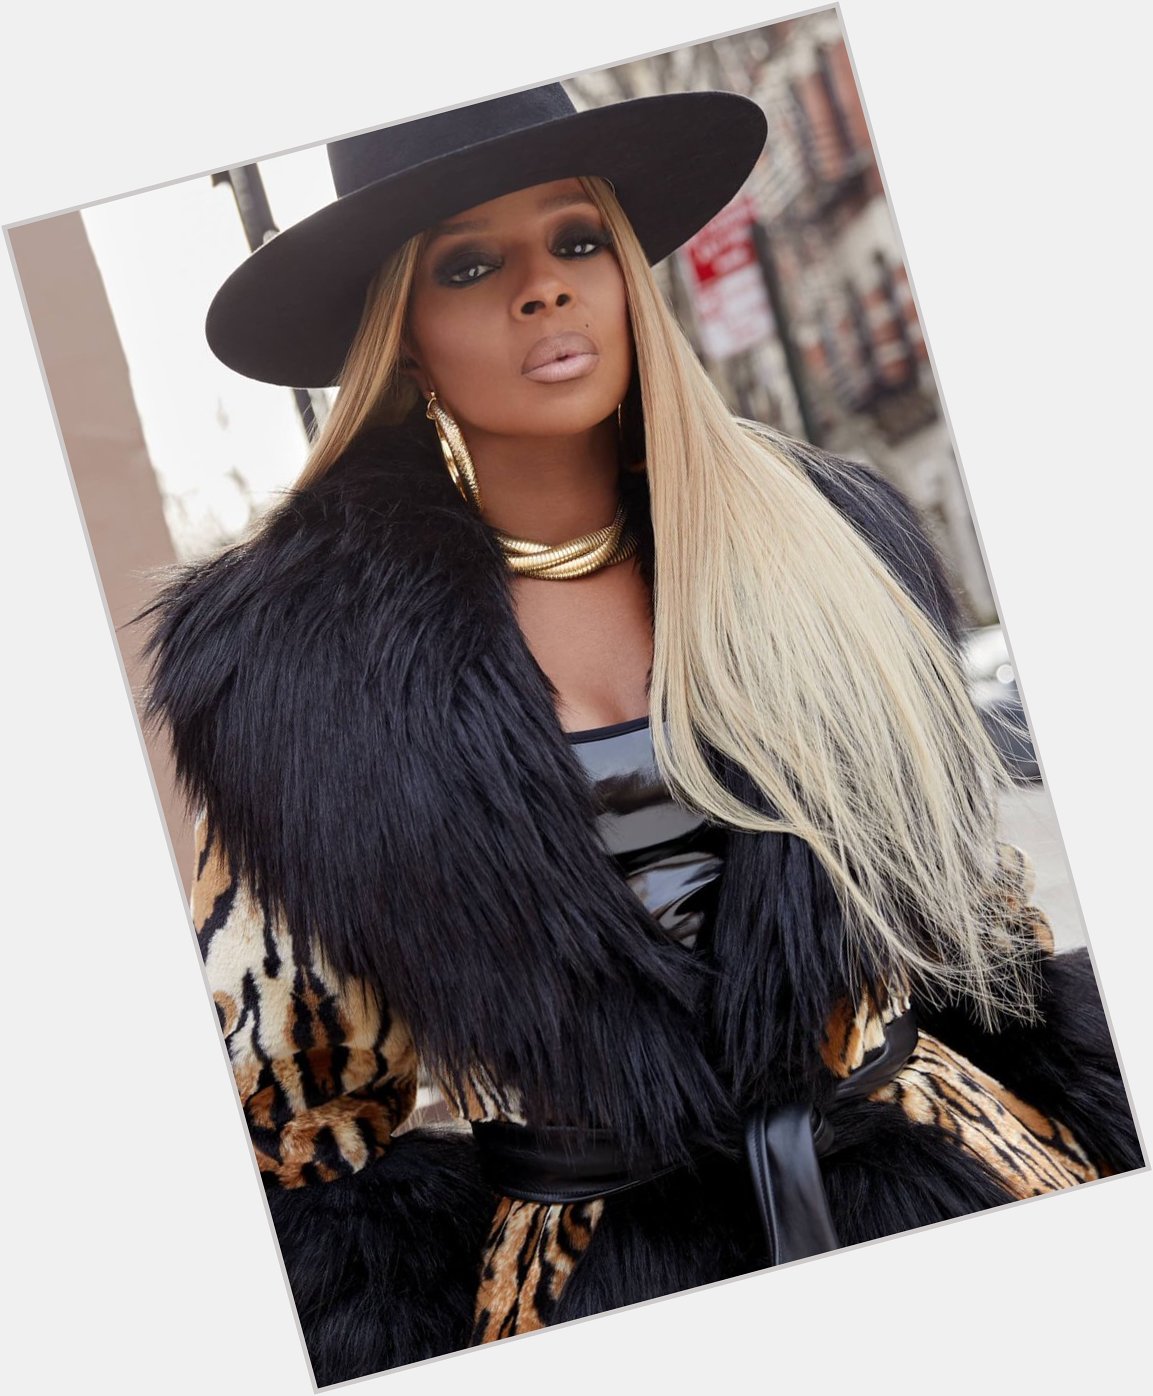 Happy birthday to the legendary Mary J. Blige! The Queen of Hip Hop & Soul turns 50 today 